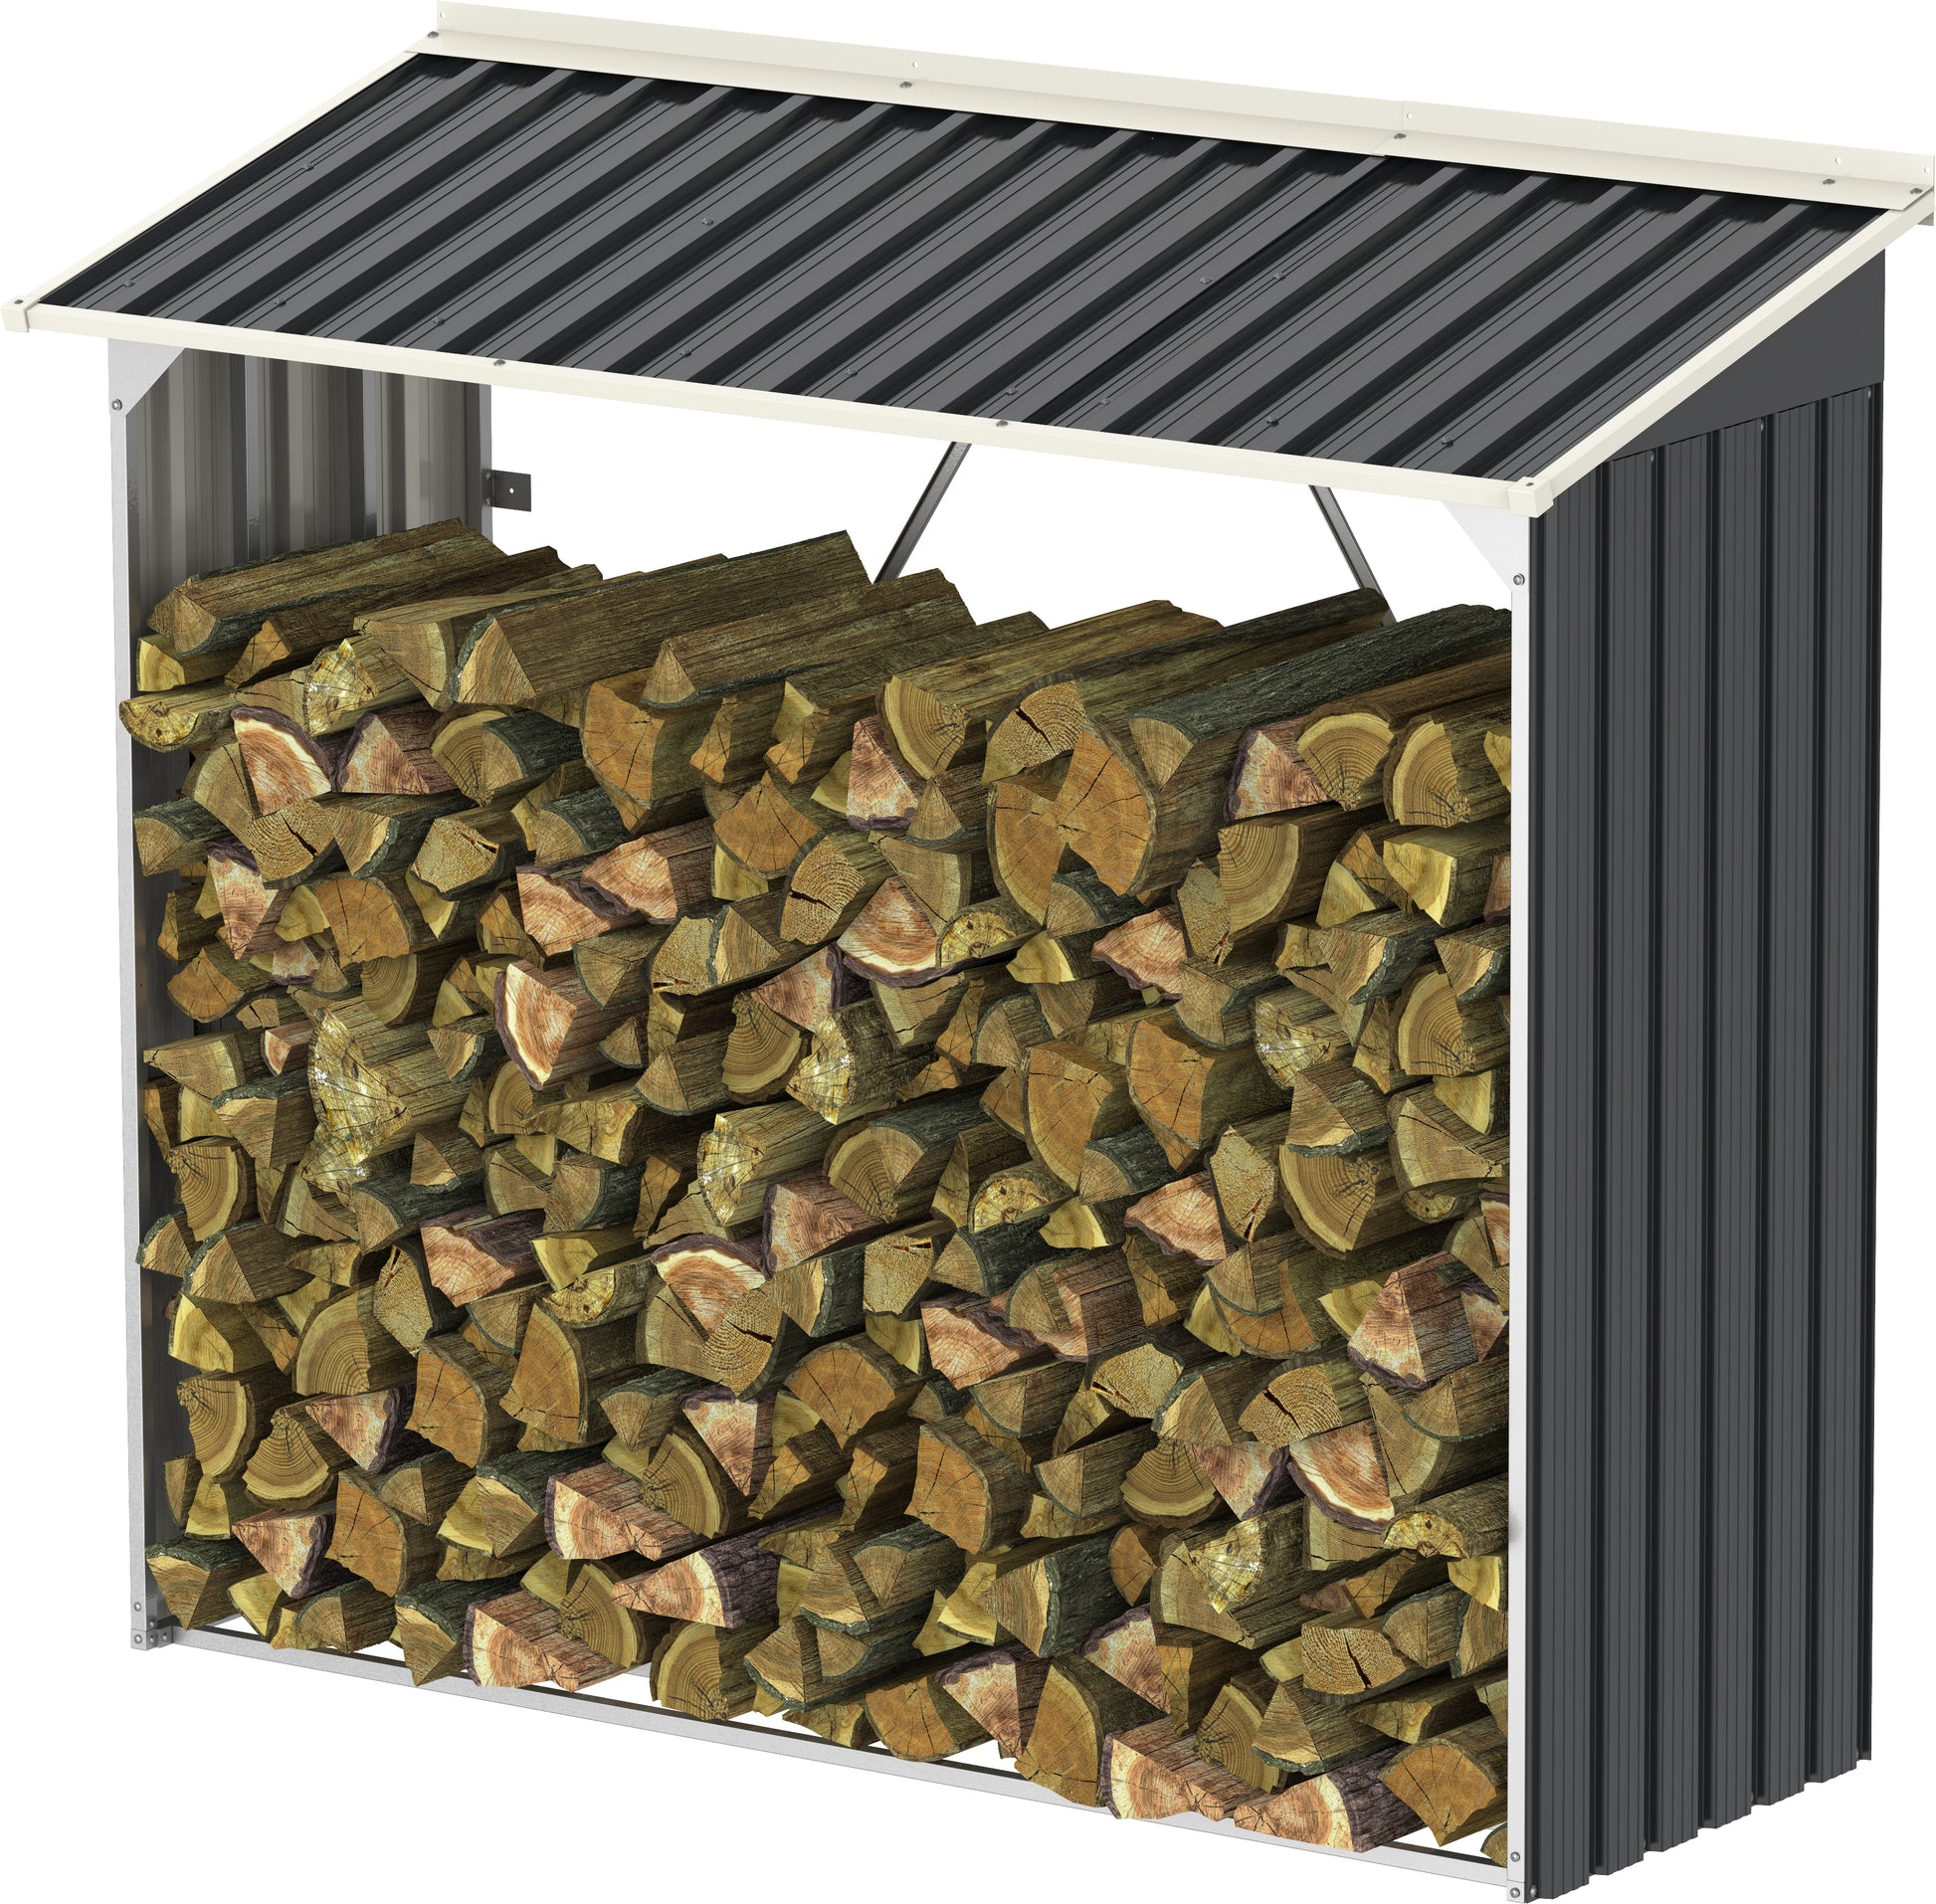 Duramax woodstore, 6x2, ideal for storing firewood, with built-in strips on the ground to keep firewood off the ground. 